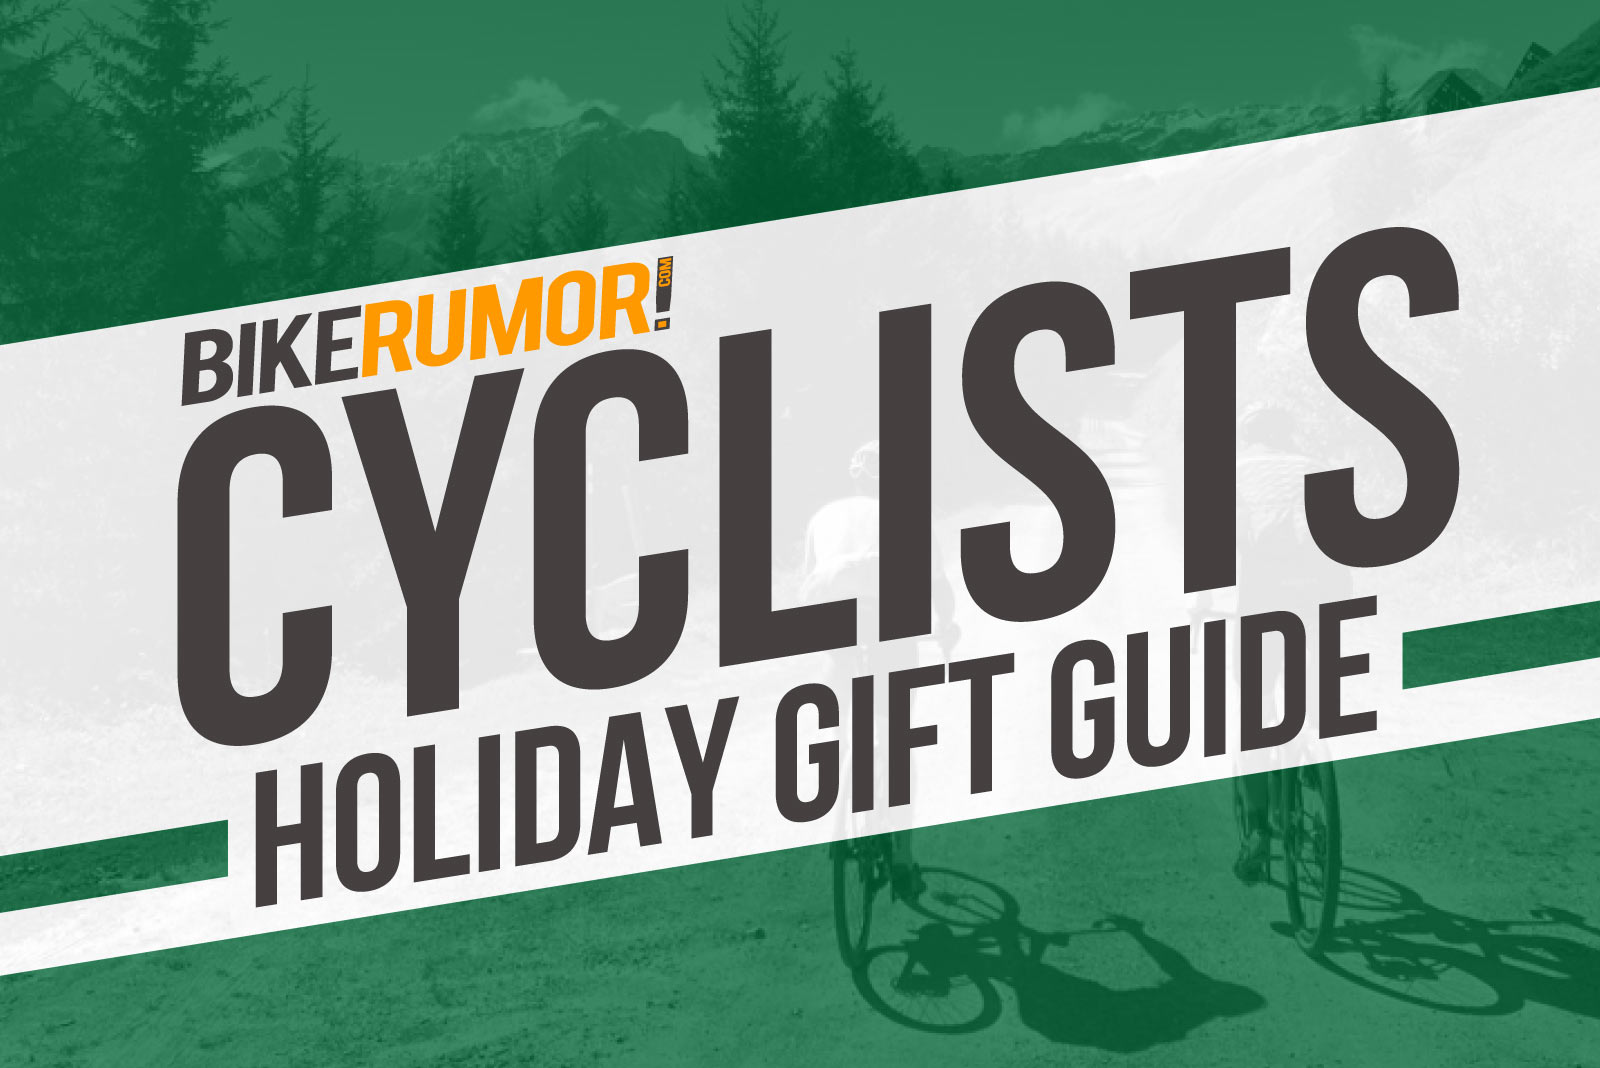 holiday gift guide shows the best gifts for cyclists